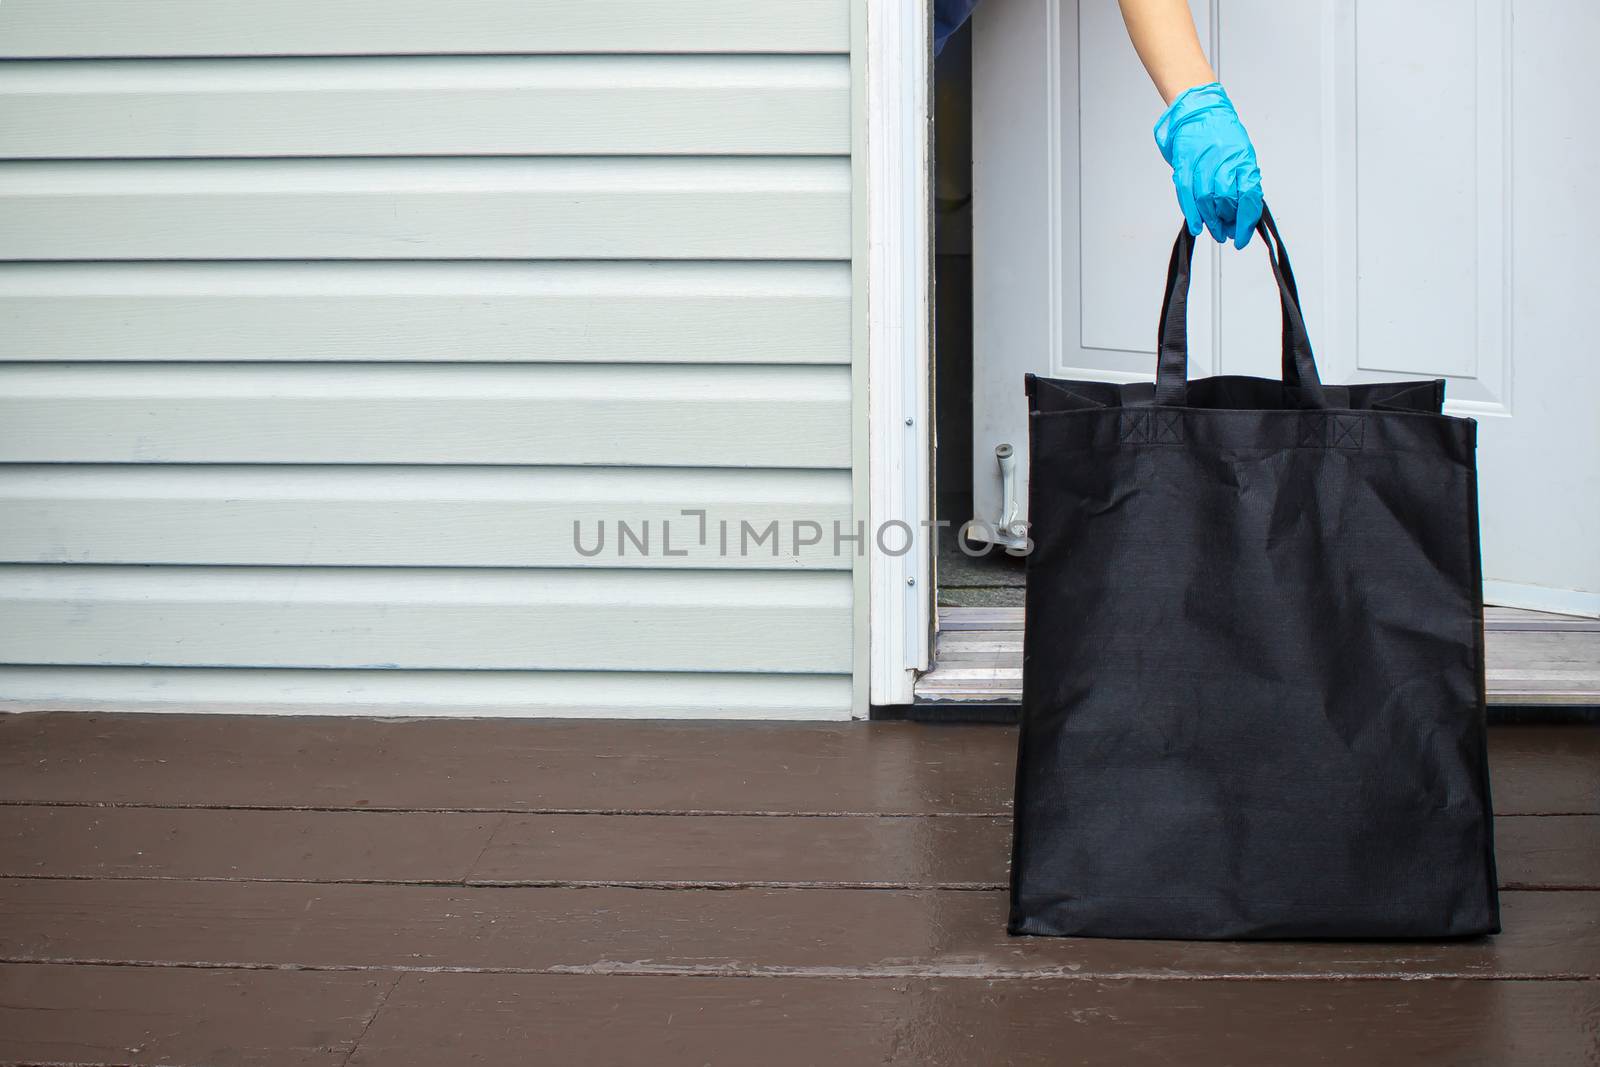 A person wearing gloves, picking up a groceries bag from a home entrance by oasisamuel